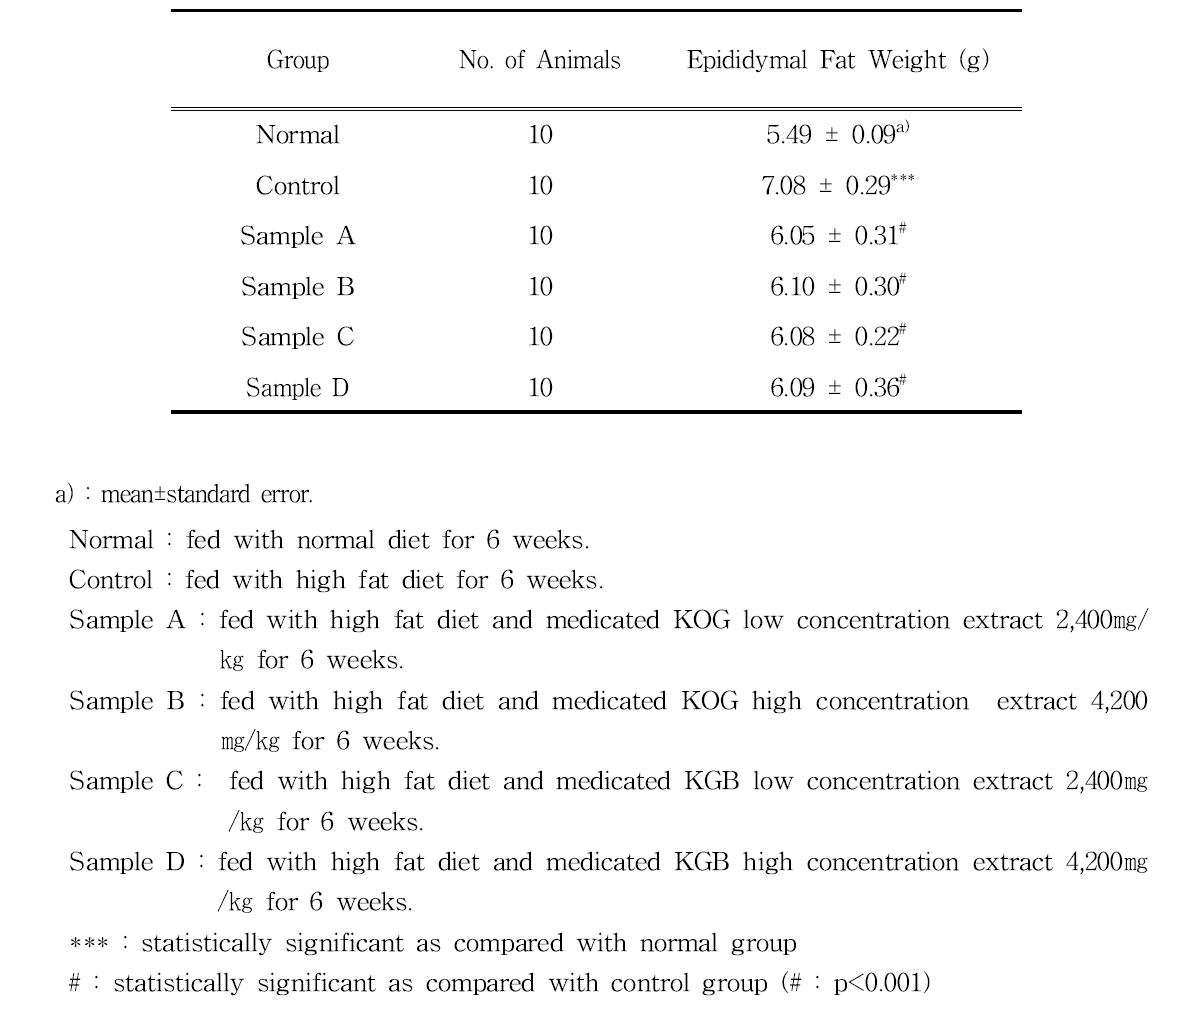 Effects of KOG, KDB and KGB Extract on the Epididymal Fat Weight in Rats Fed with High Fat Diet